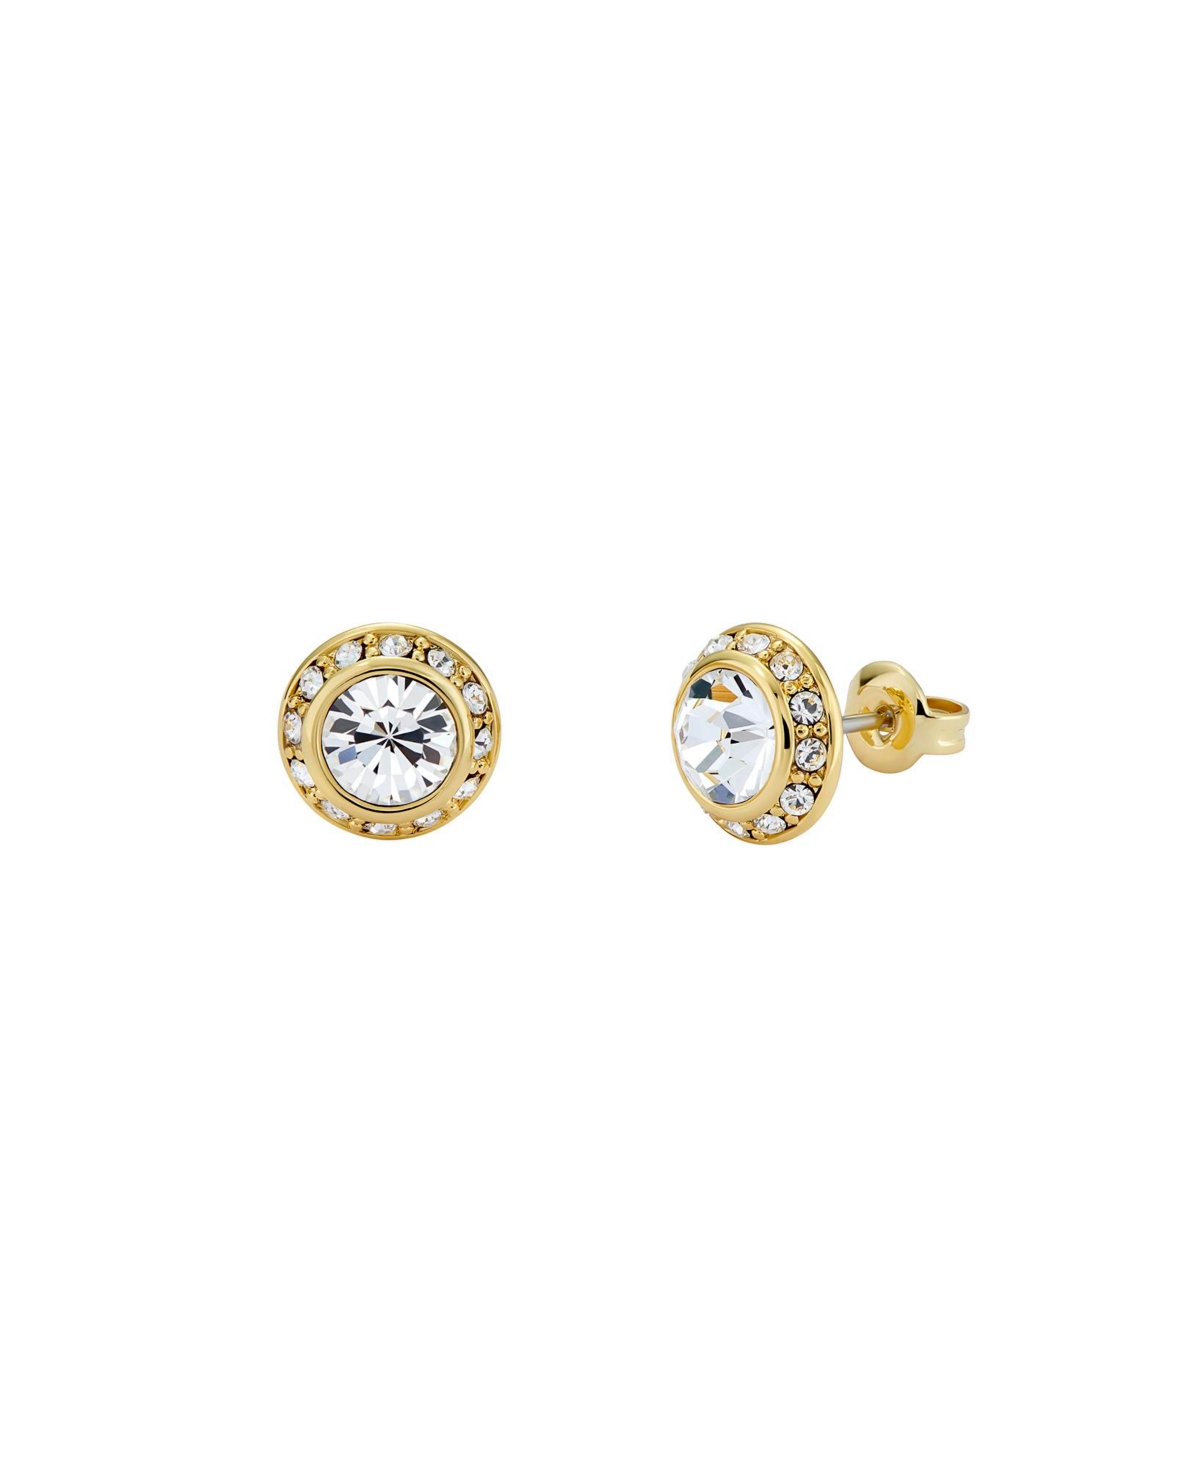 Soletia: Solitaire Sparkle Crystal Stud Earrings - Rose gold